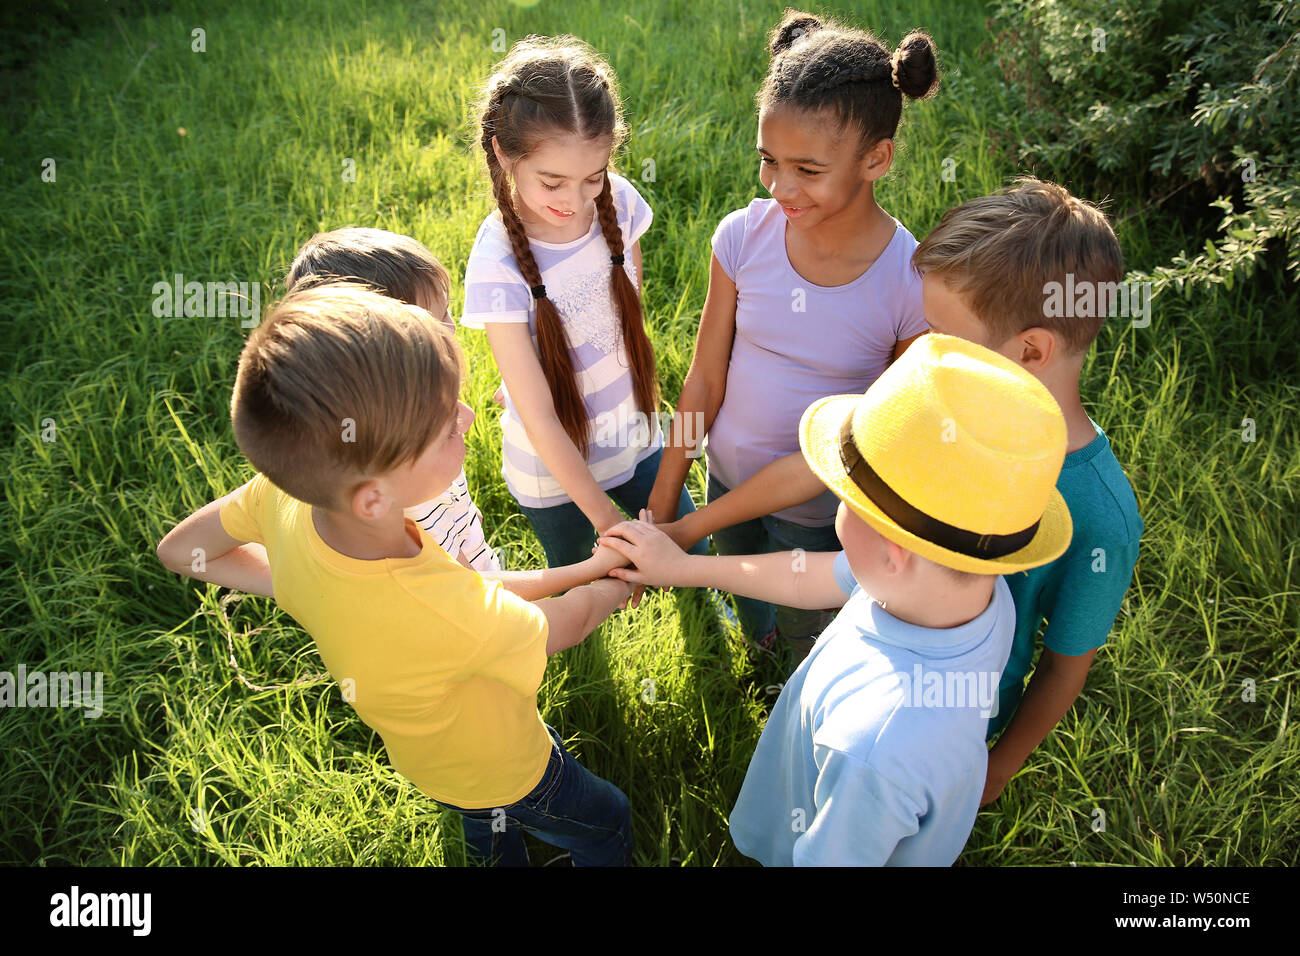 Group of children putting hands together outdoors Stock Photo - Alamy